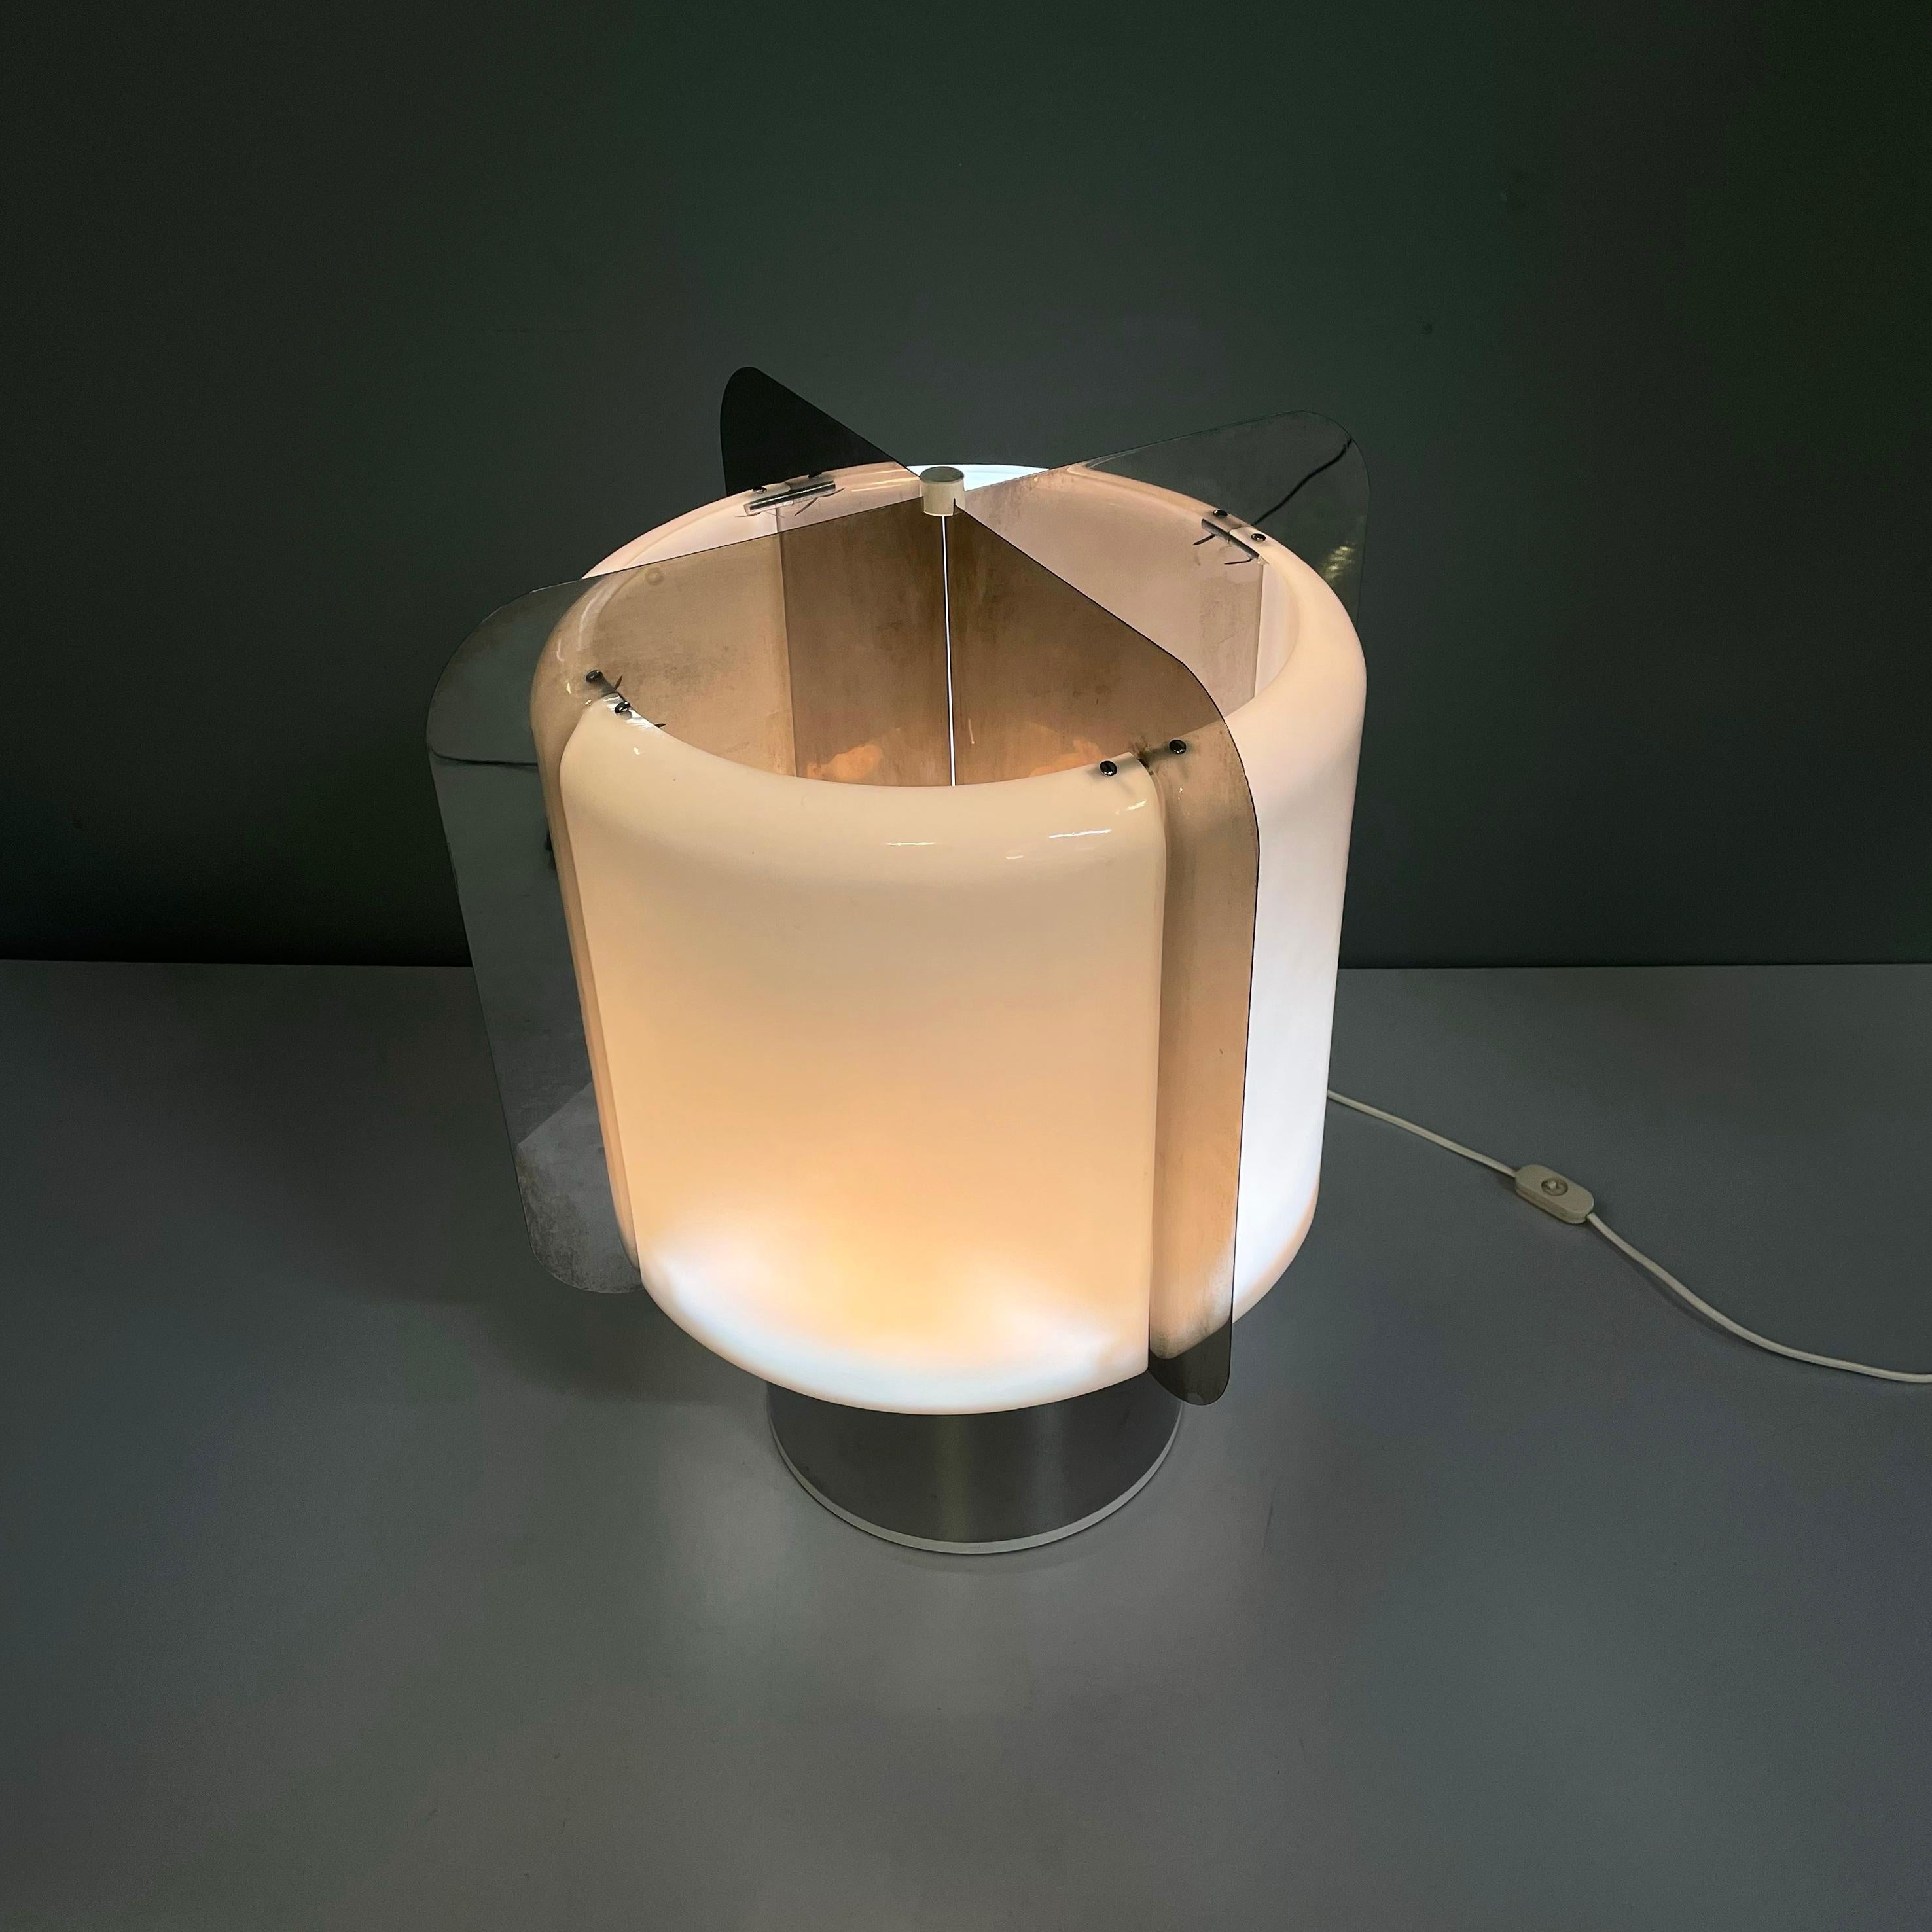 Italian space age Opaline plexiglass and aluminum Table lamp T 467 by Luci, 1970s
Table lamp mod. T 467 with 4 lights and with cylindrical shape. The cylindrical lampshade in opaline plexiglass has a thin aluminum structure in the center, that